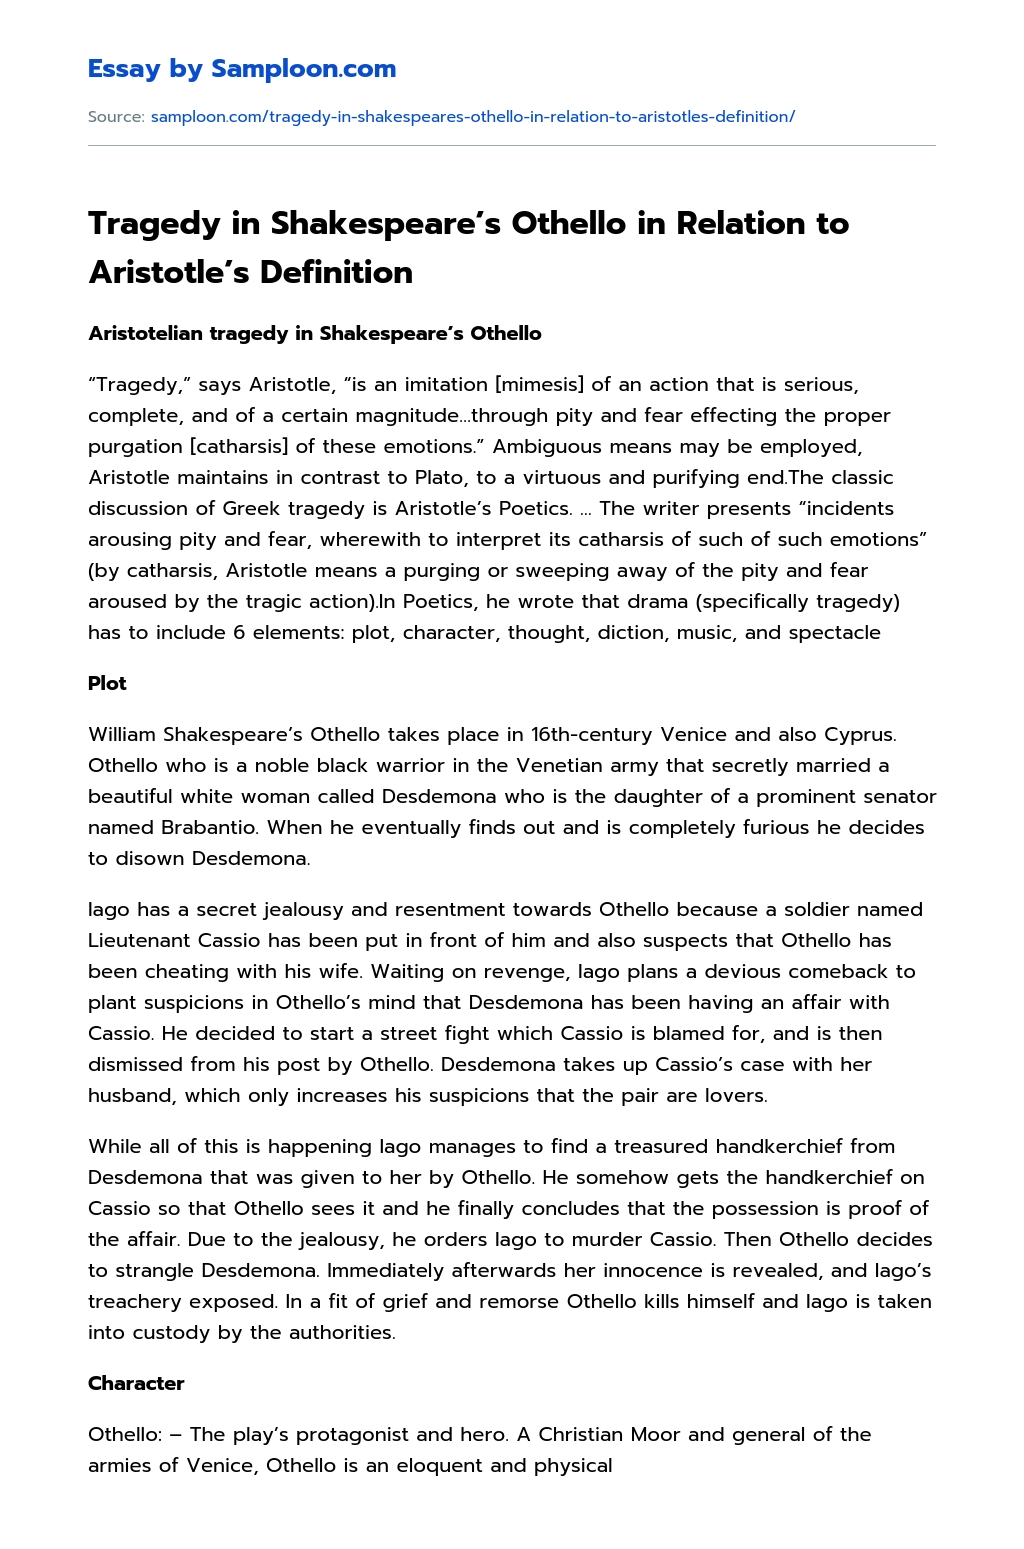 Tragedy in Shakespeare’s Othello in Relation to Aristotle’s Definition essay